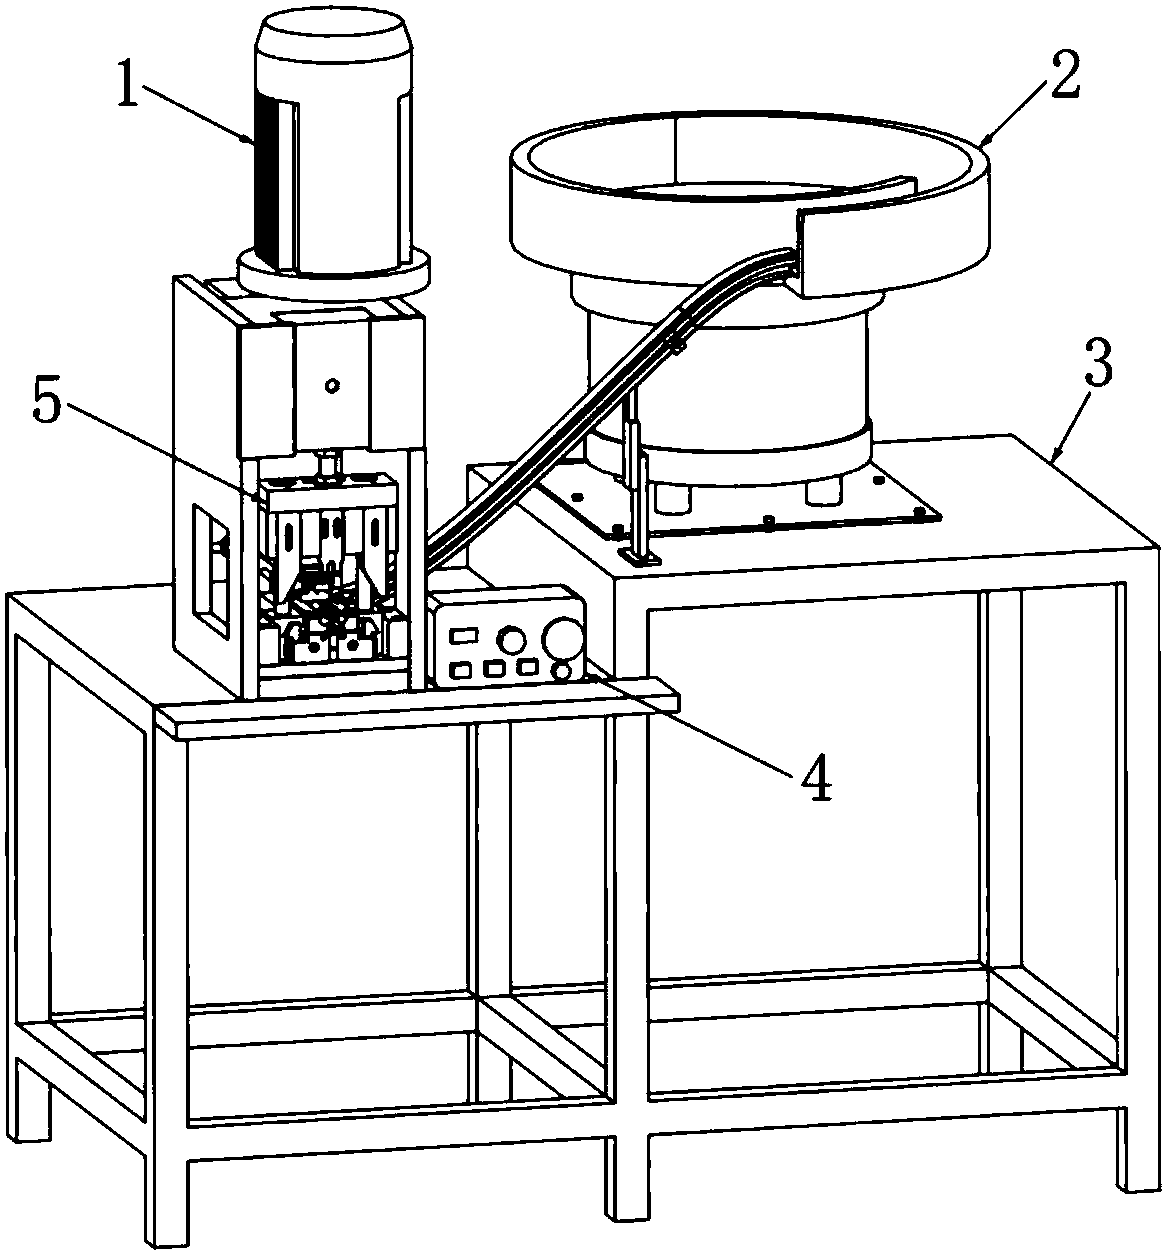 An automatic termination device for copper legs of a power cord